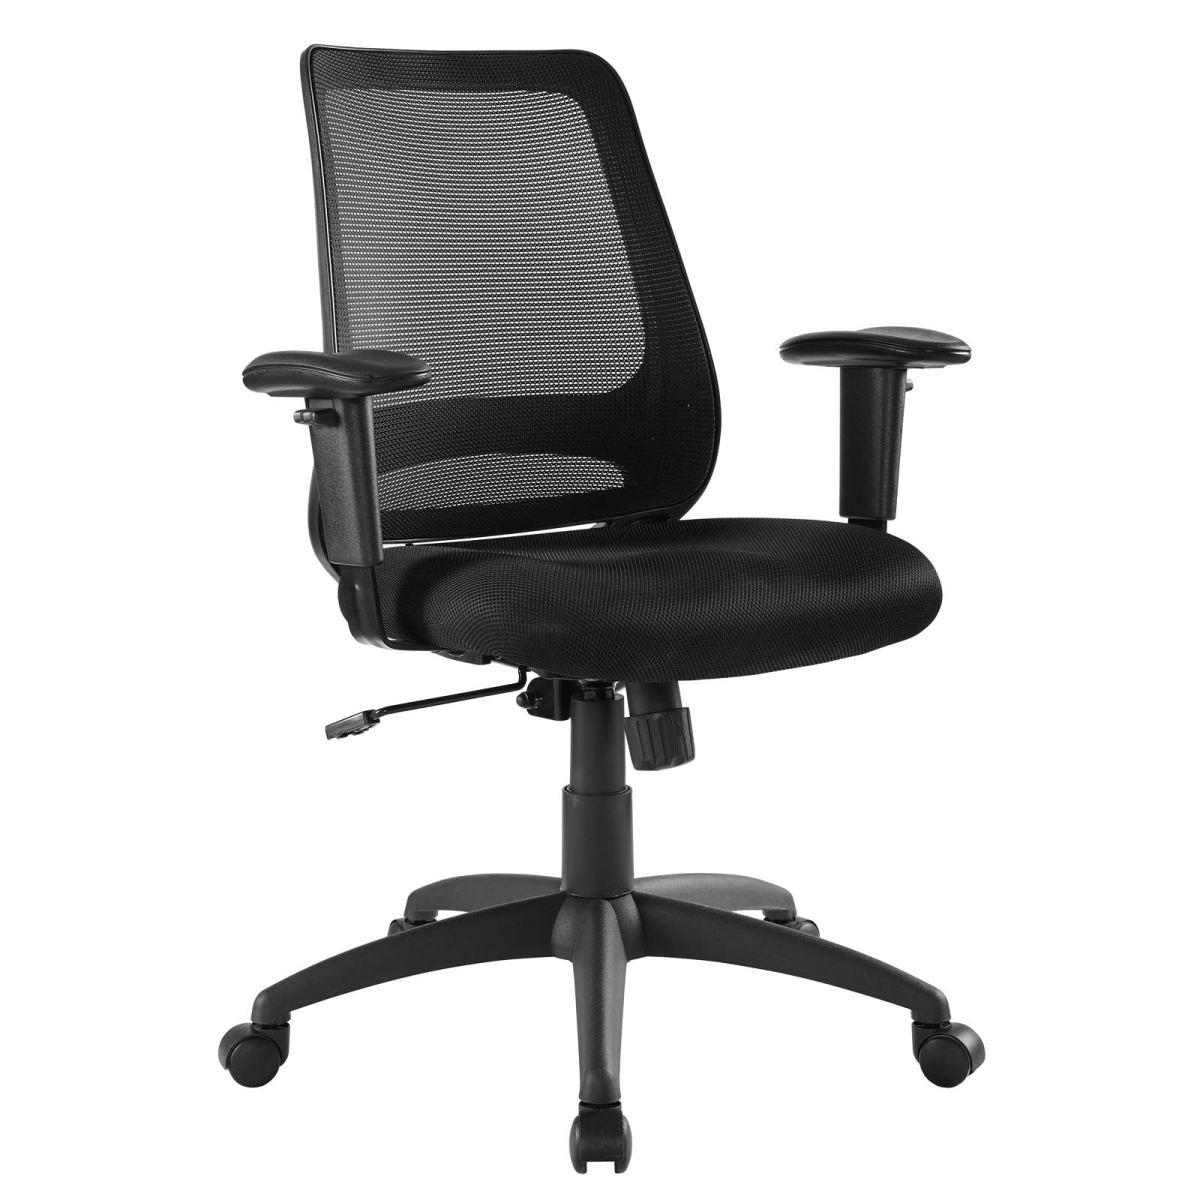 Eei-3195-blk Forge Mesh Office Chair - Black, 40.5 X 28.5 X 26 In.